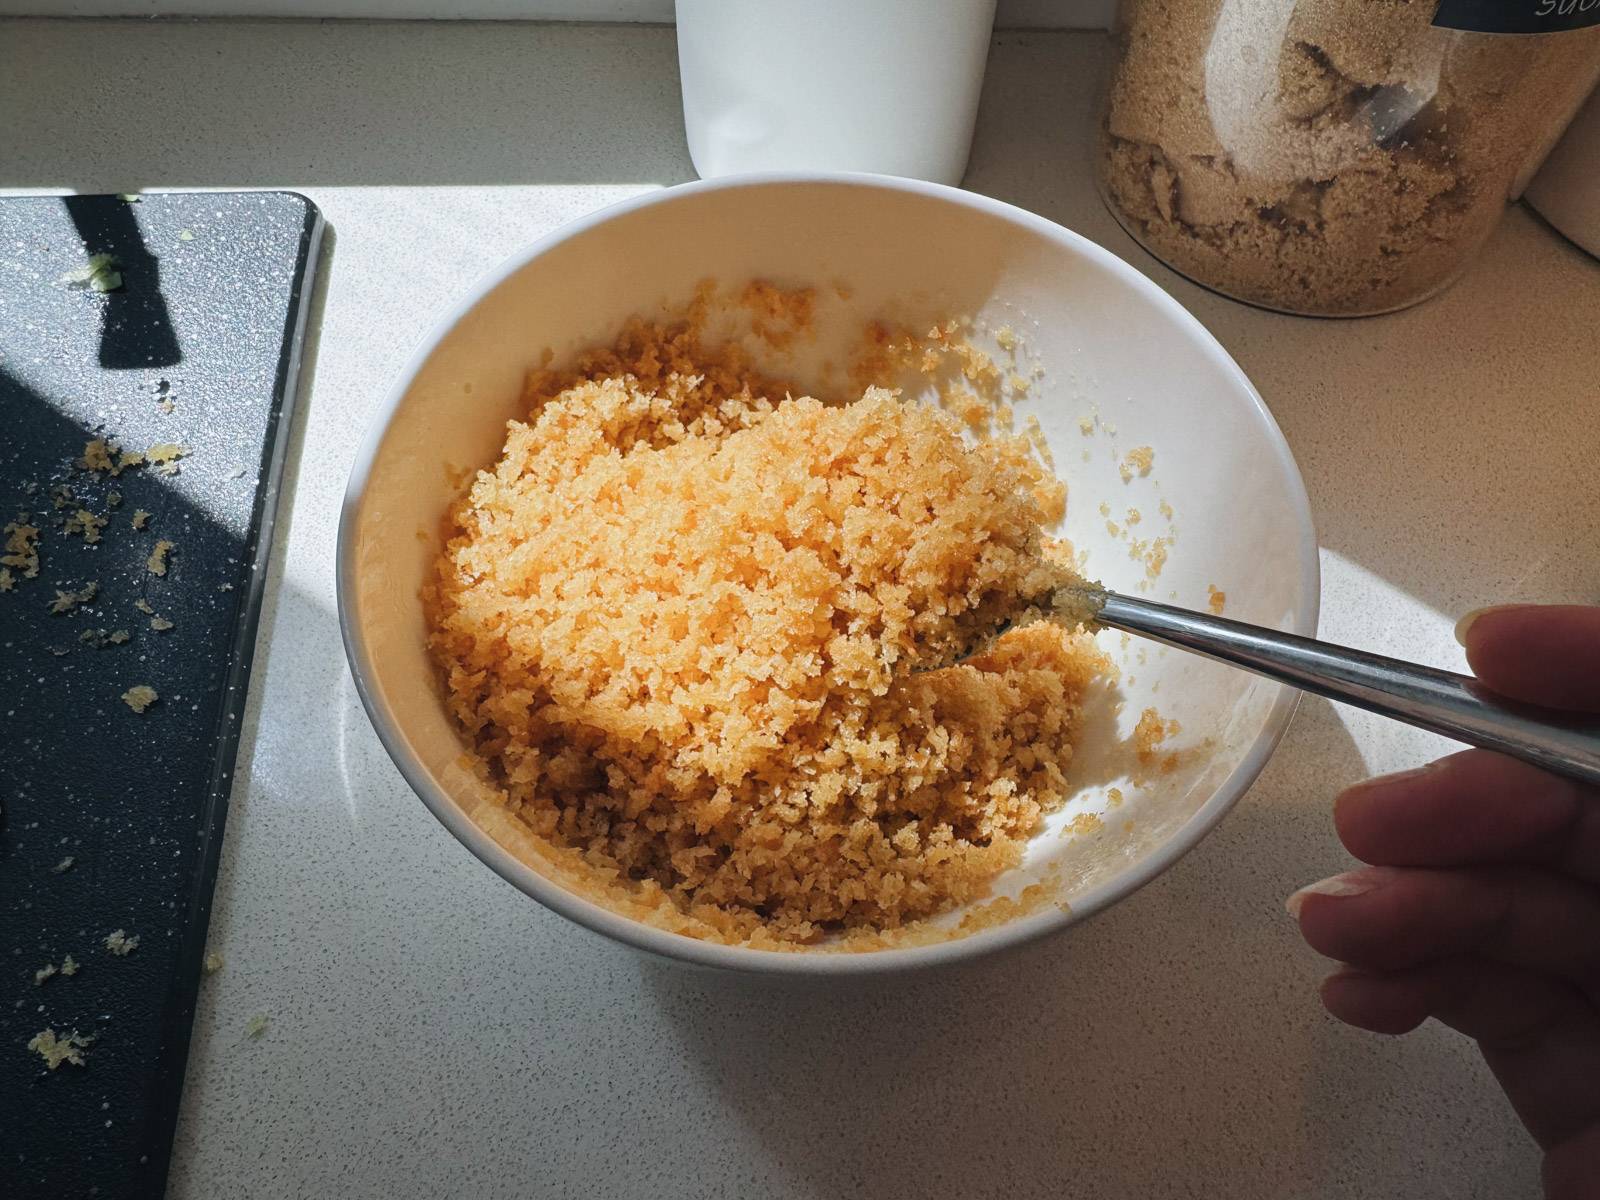 Mixing breadcrumbs in a bowl to make crispy panko topping.